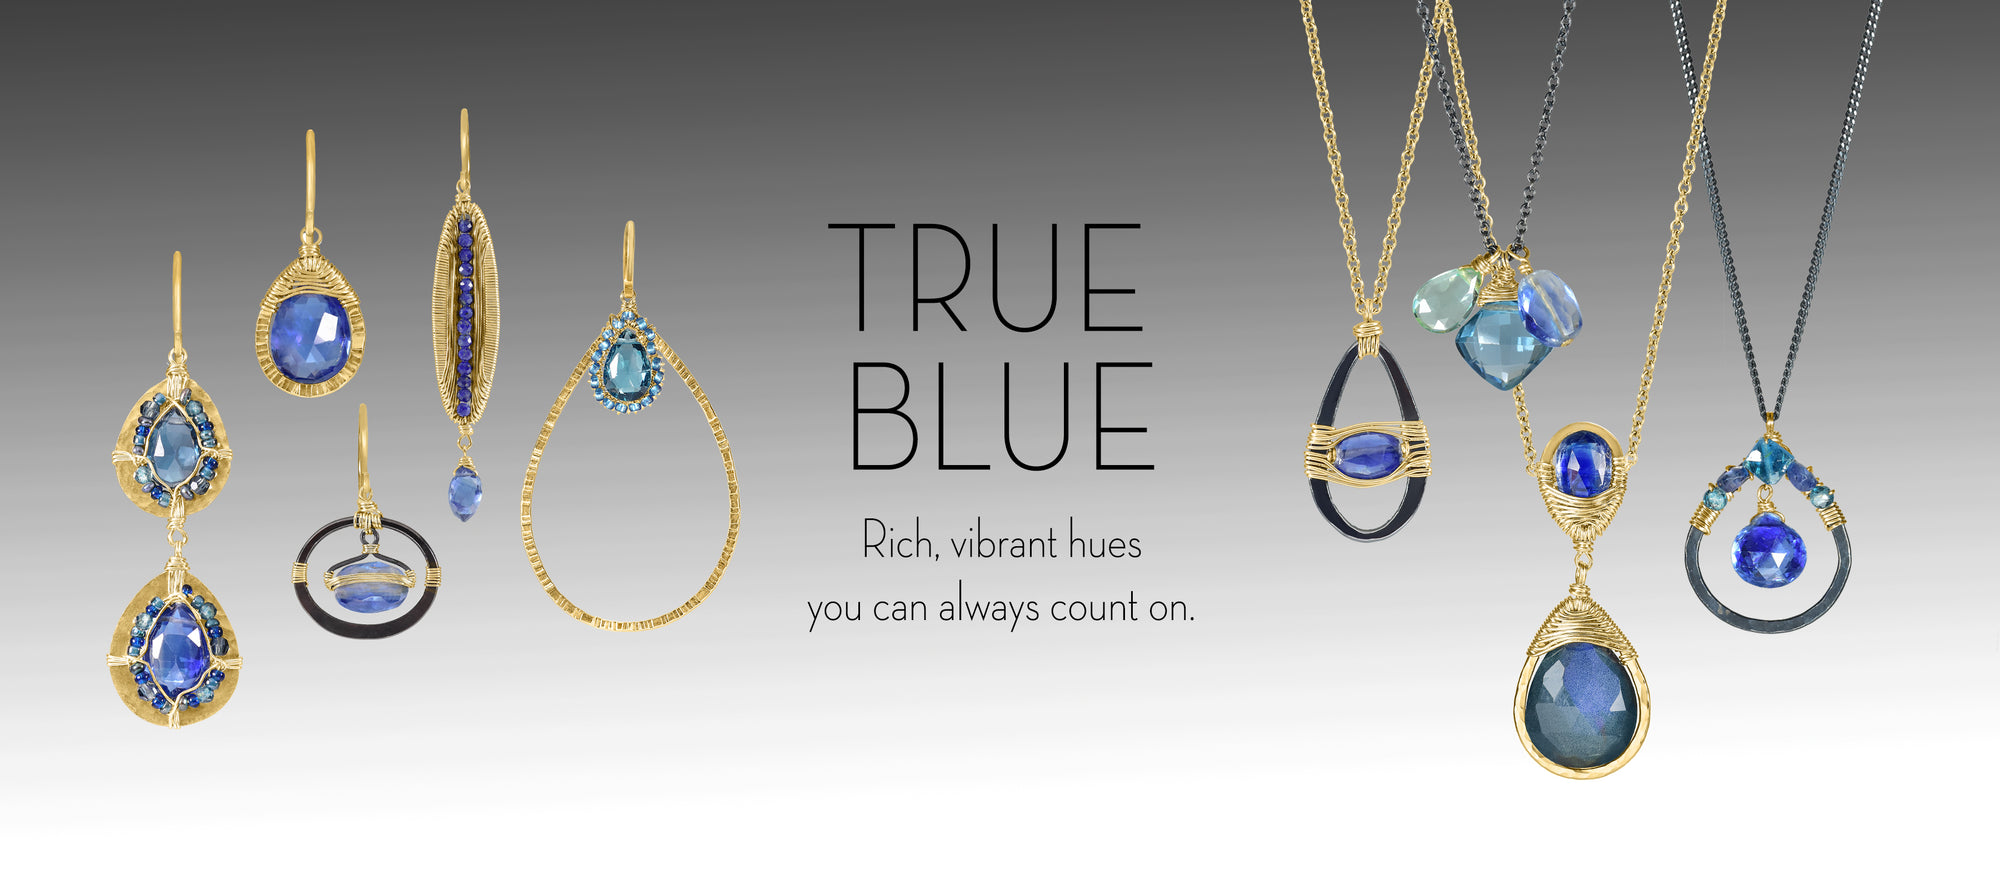 True Blue. Rich vibrant hues you can always count on.